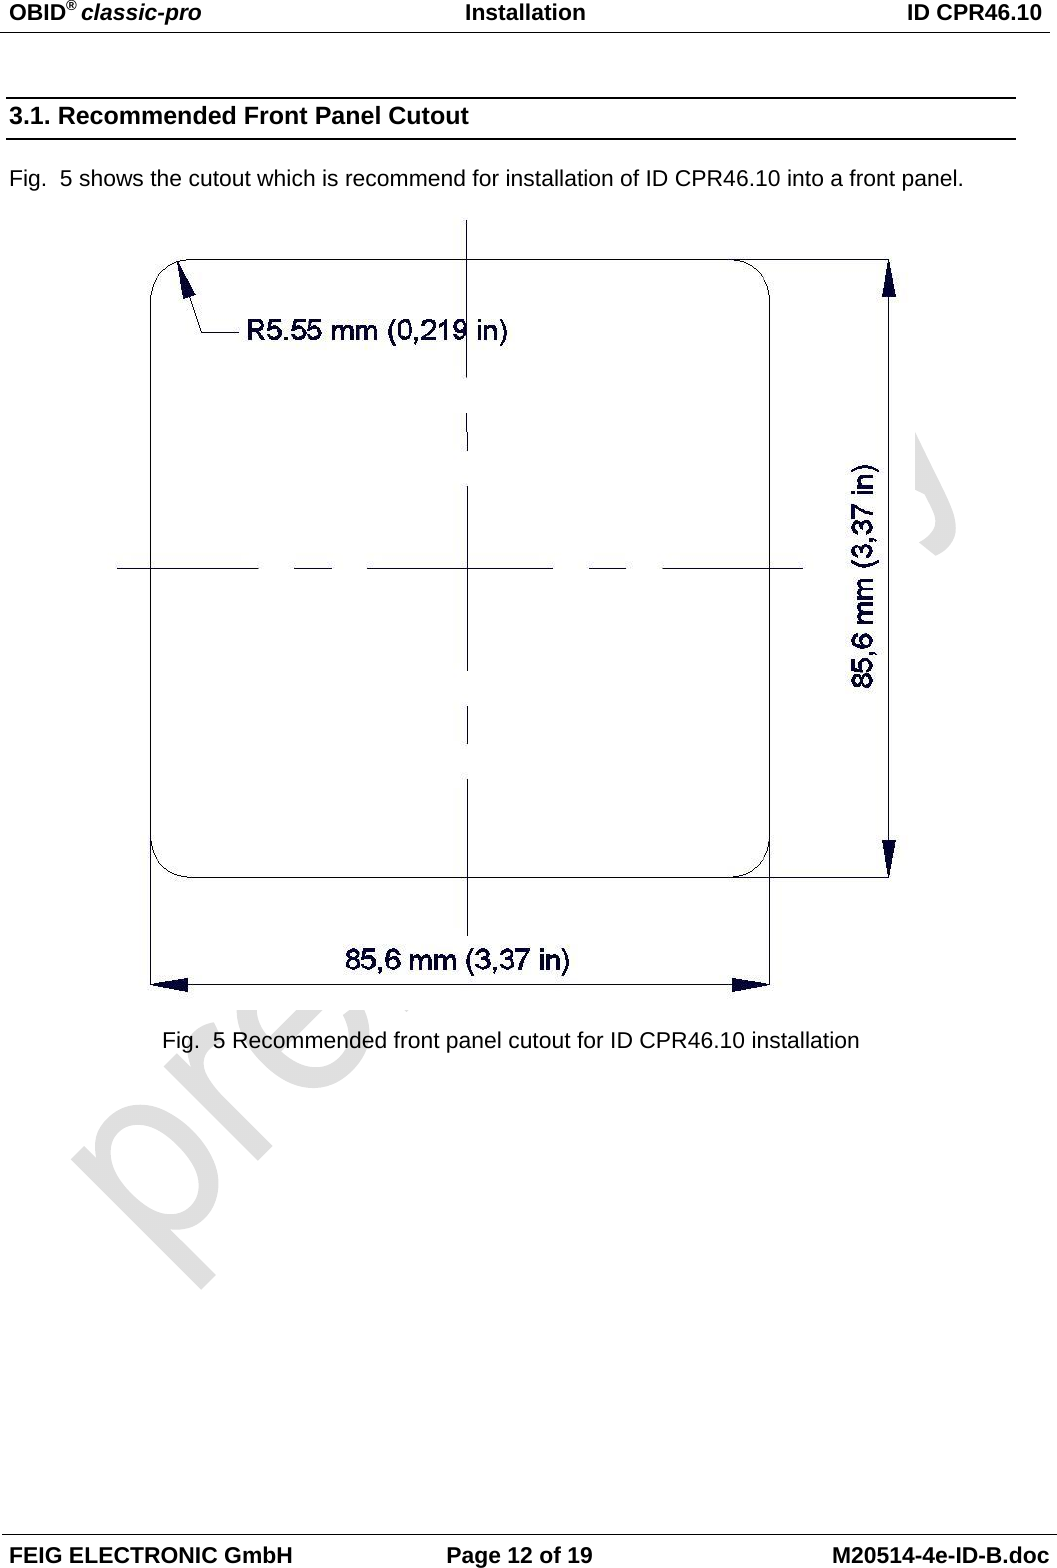 OBID® classic-pro Installation  ID CPR46.10  FEIG ELECTRONIC GmbH  Page 12 of 19  M20514-4e-ID-B.doc  3.1. Recommended Front Panel Cutout Fig.  5 shows the cutout which is recommend for installation of ID CPR46.10 into a front panel.  Fig.  5 Recommended front panel cutout for ID CPR46.10 installation   